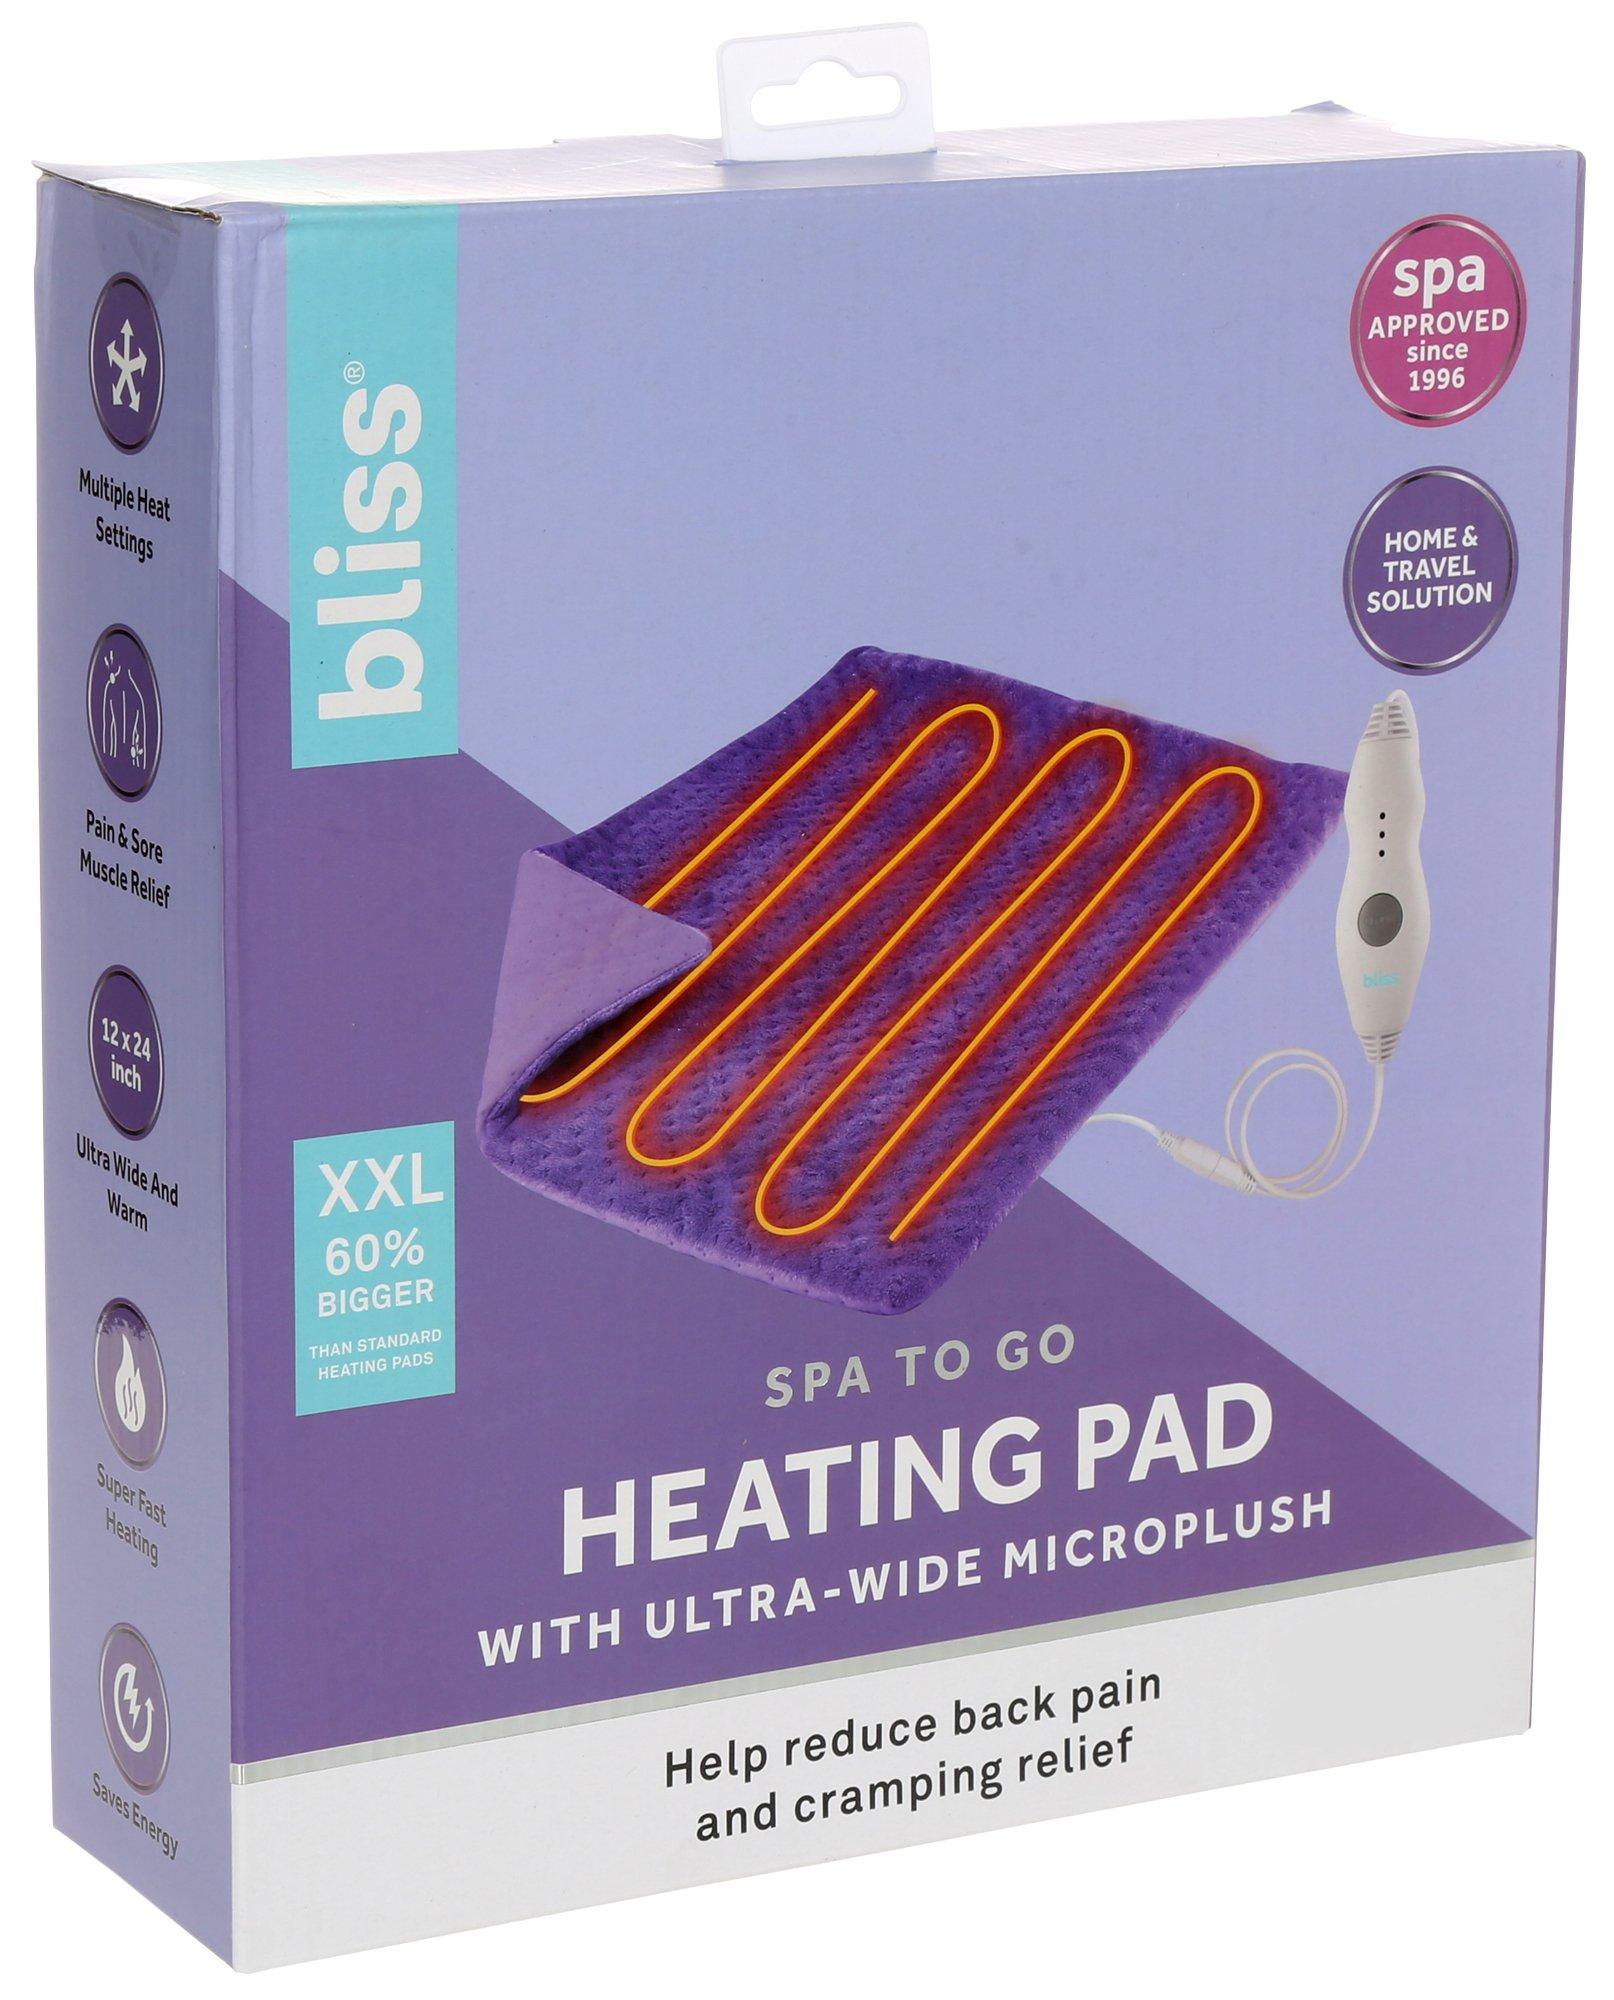 Spa To Go Heating Pad